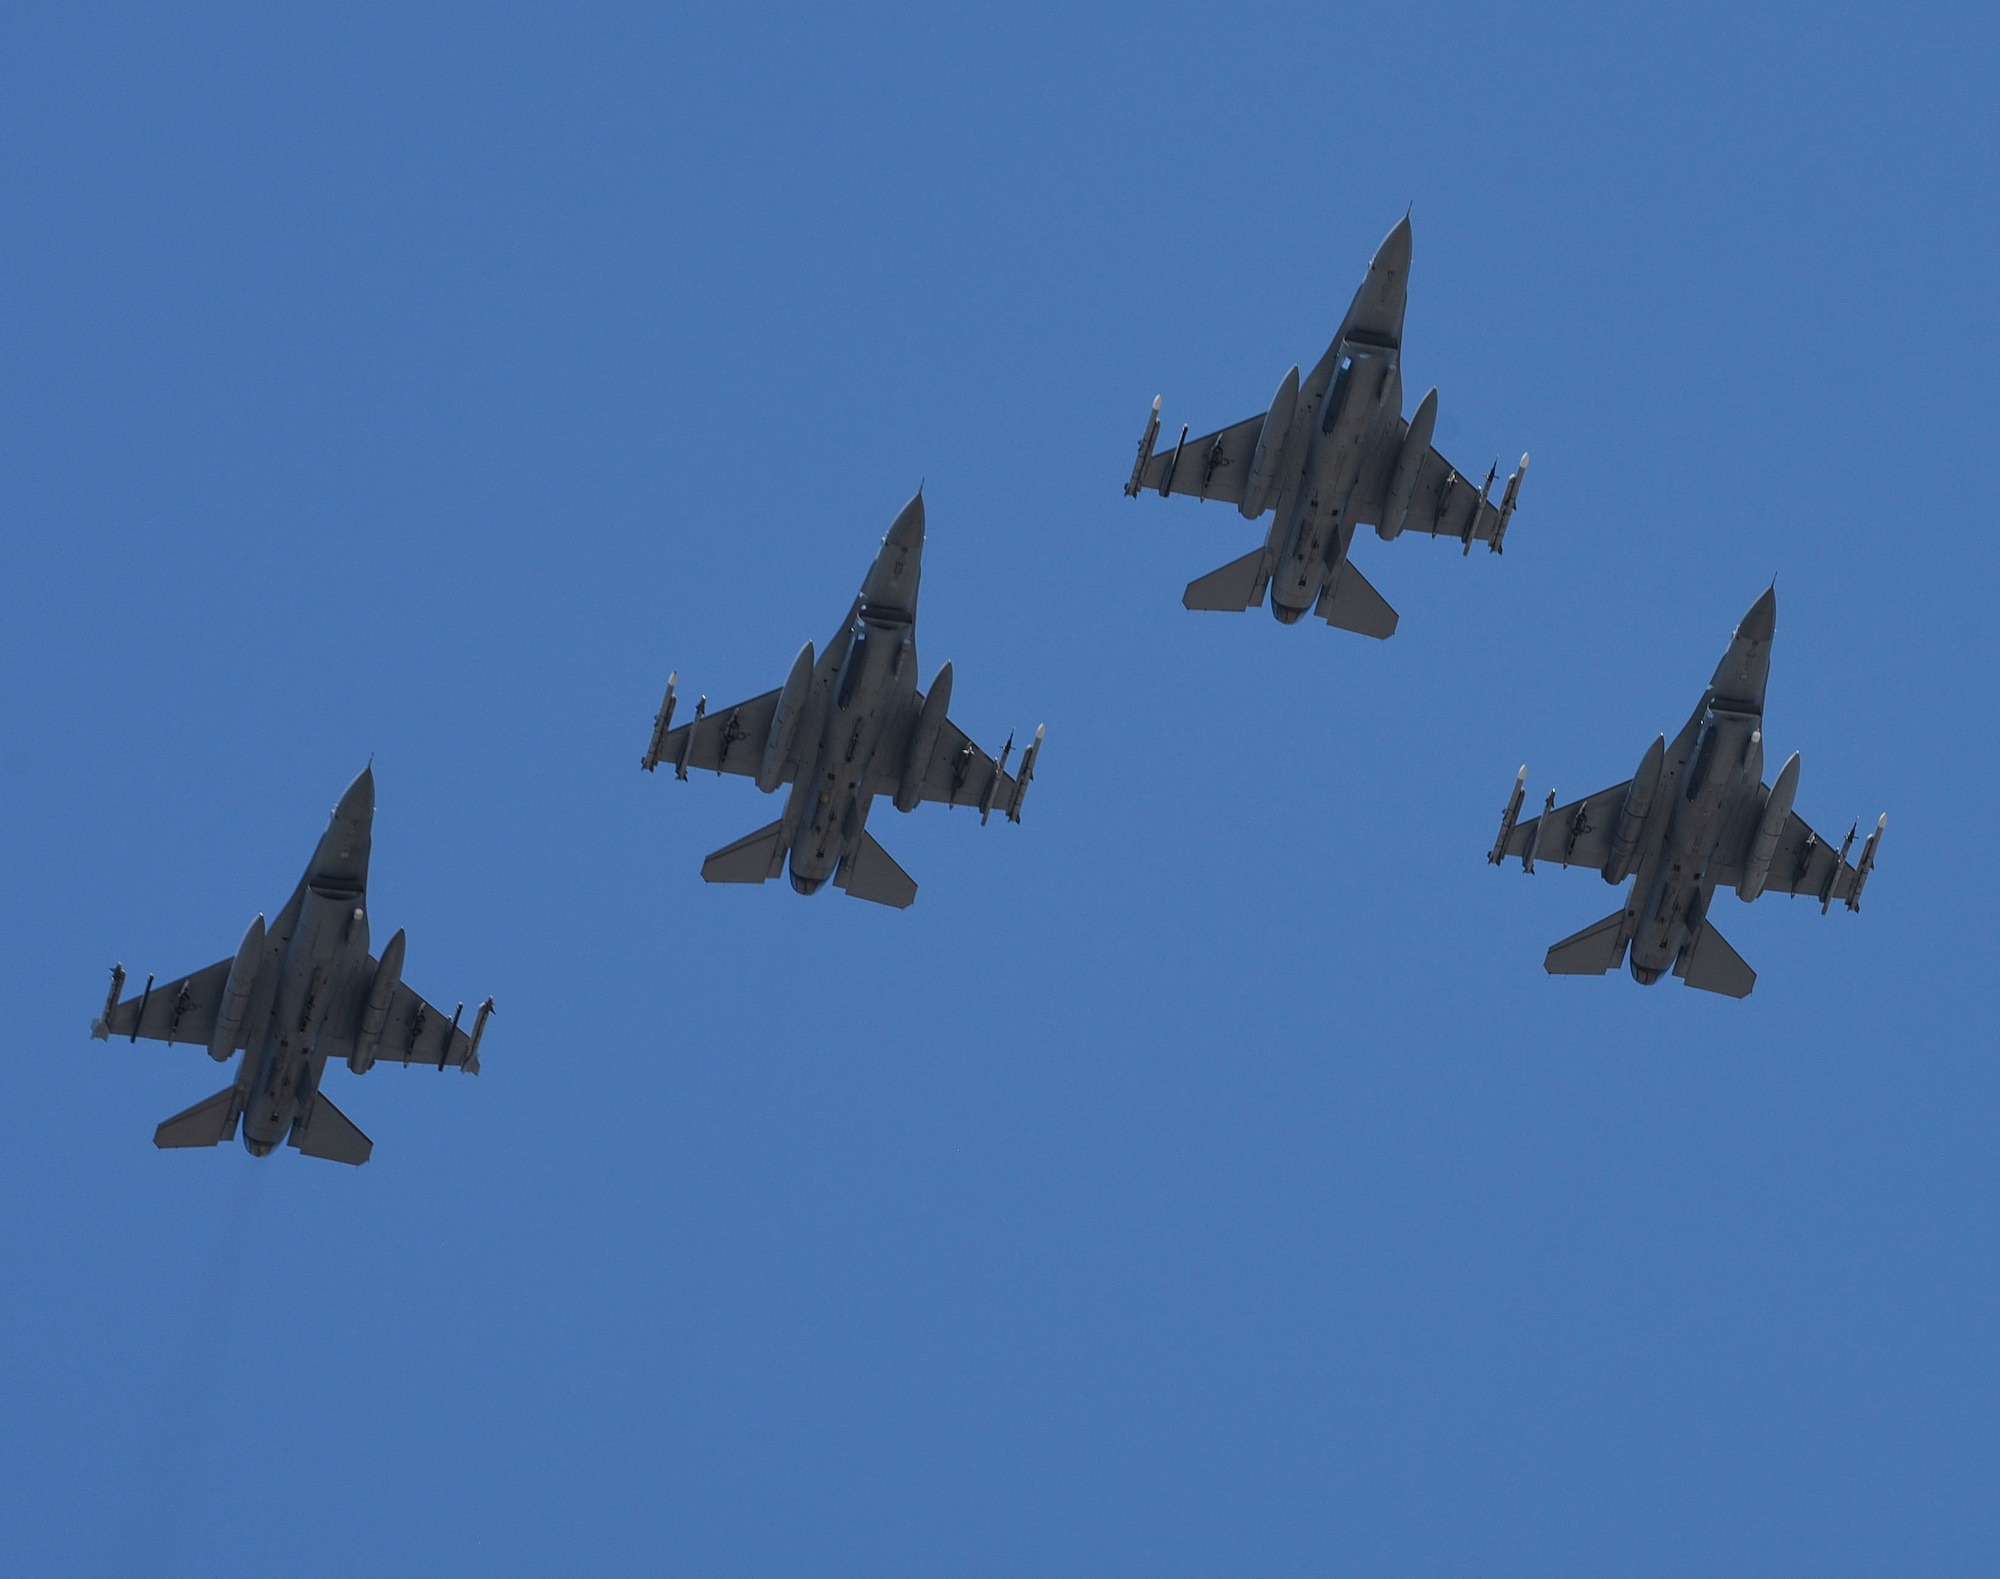 U.S. Air Force F-16 Fighting Falcons, assigned to the 480th Expeditionary Fighter Squadron, participate in Polish Armed Forces Day at Warsaw, Poland, August 15, 2020. The United States was honored to participate in this ceremony with the static display of heavy equipment as well as a flyover of the F-16’s. (U.S. Air Force photo by Senior Airman Melody W. Howley)